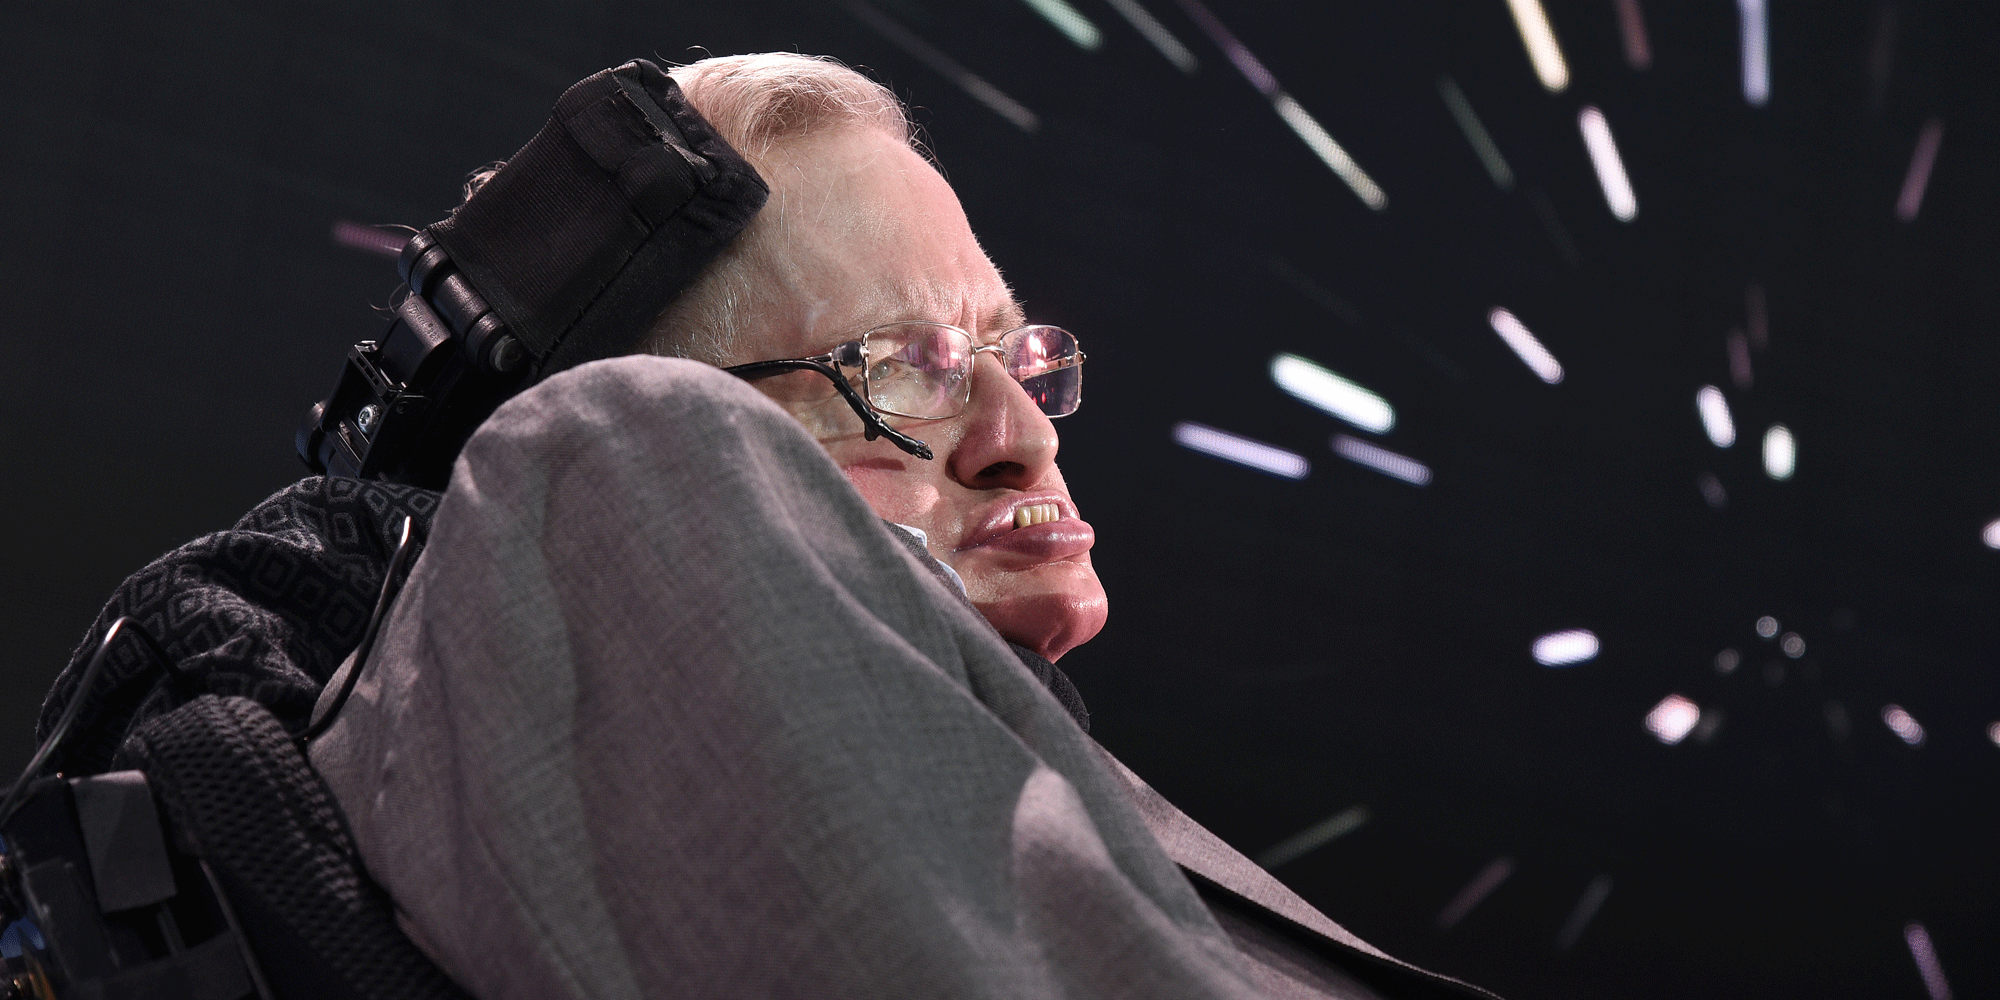 Stephen Hawking has joined a lawsuit aimed at stopping what he considers to be attempts to privatise the NHS